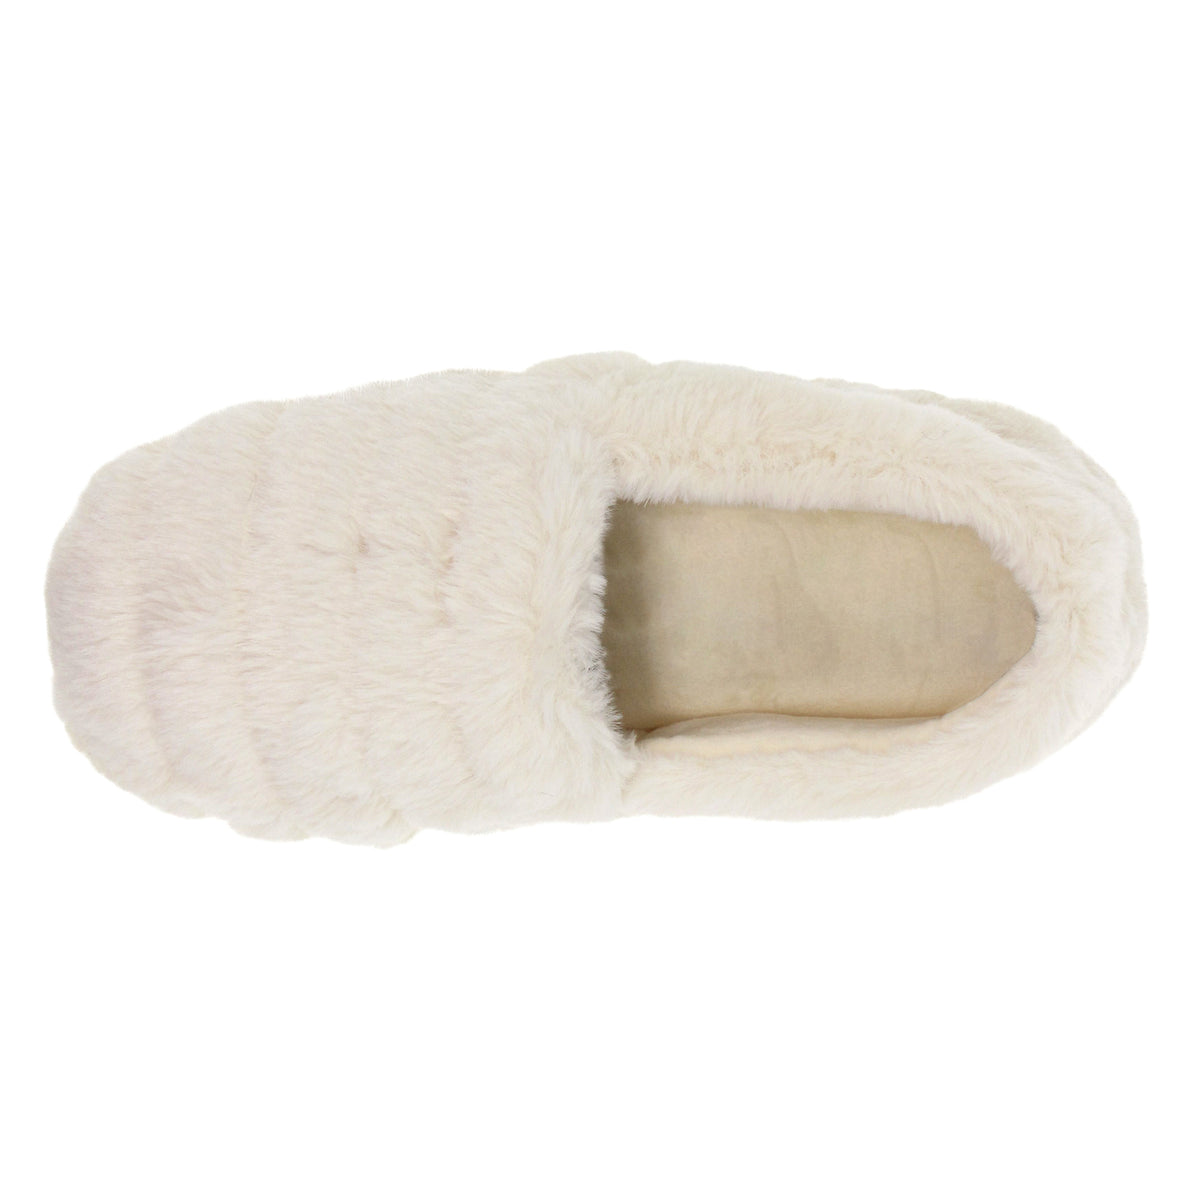 Isotoner Women's Recycled Faux Fur Espadrille Slipper with Recycled Velour Sock & Lining